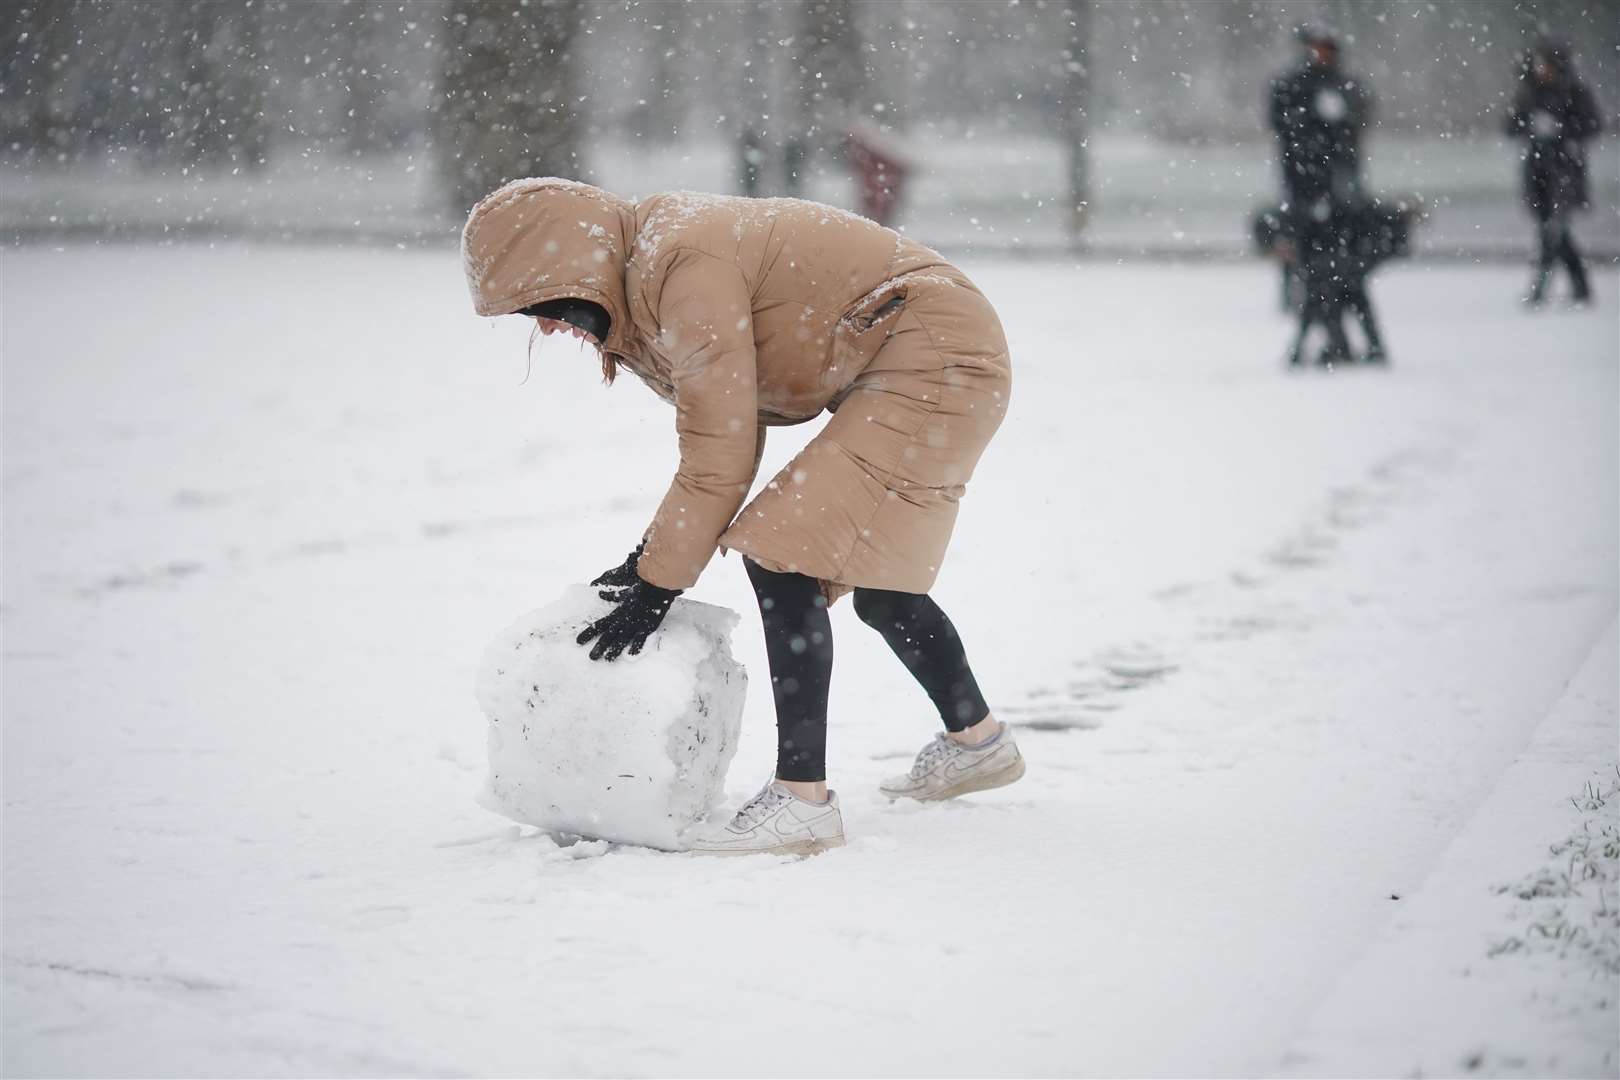 Do you want to build a snowman? (Aaron Chown/PA)